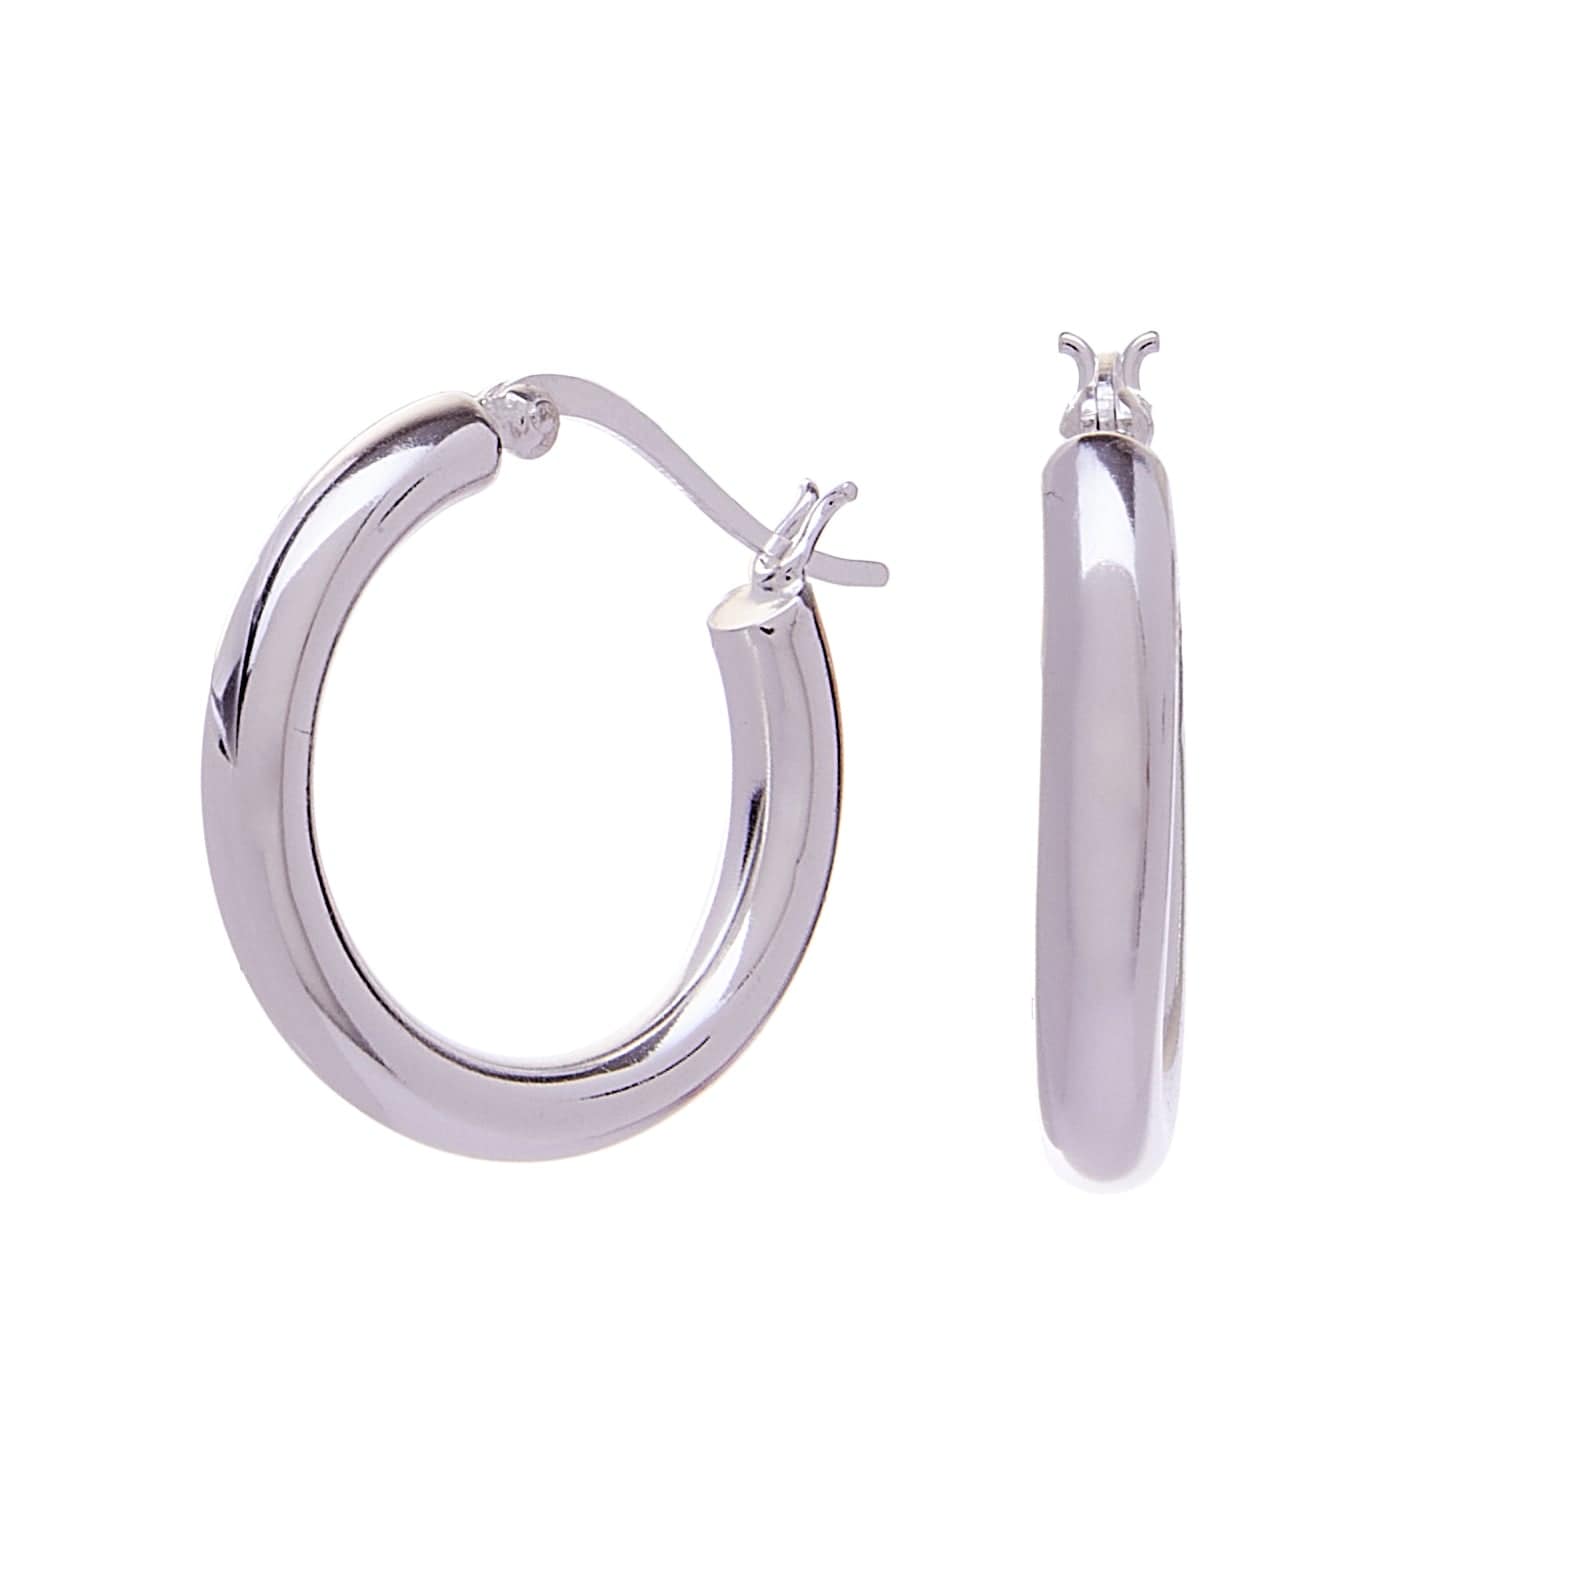 Eshe Everyday Earrings - Recycled Silver